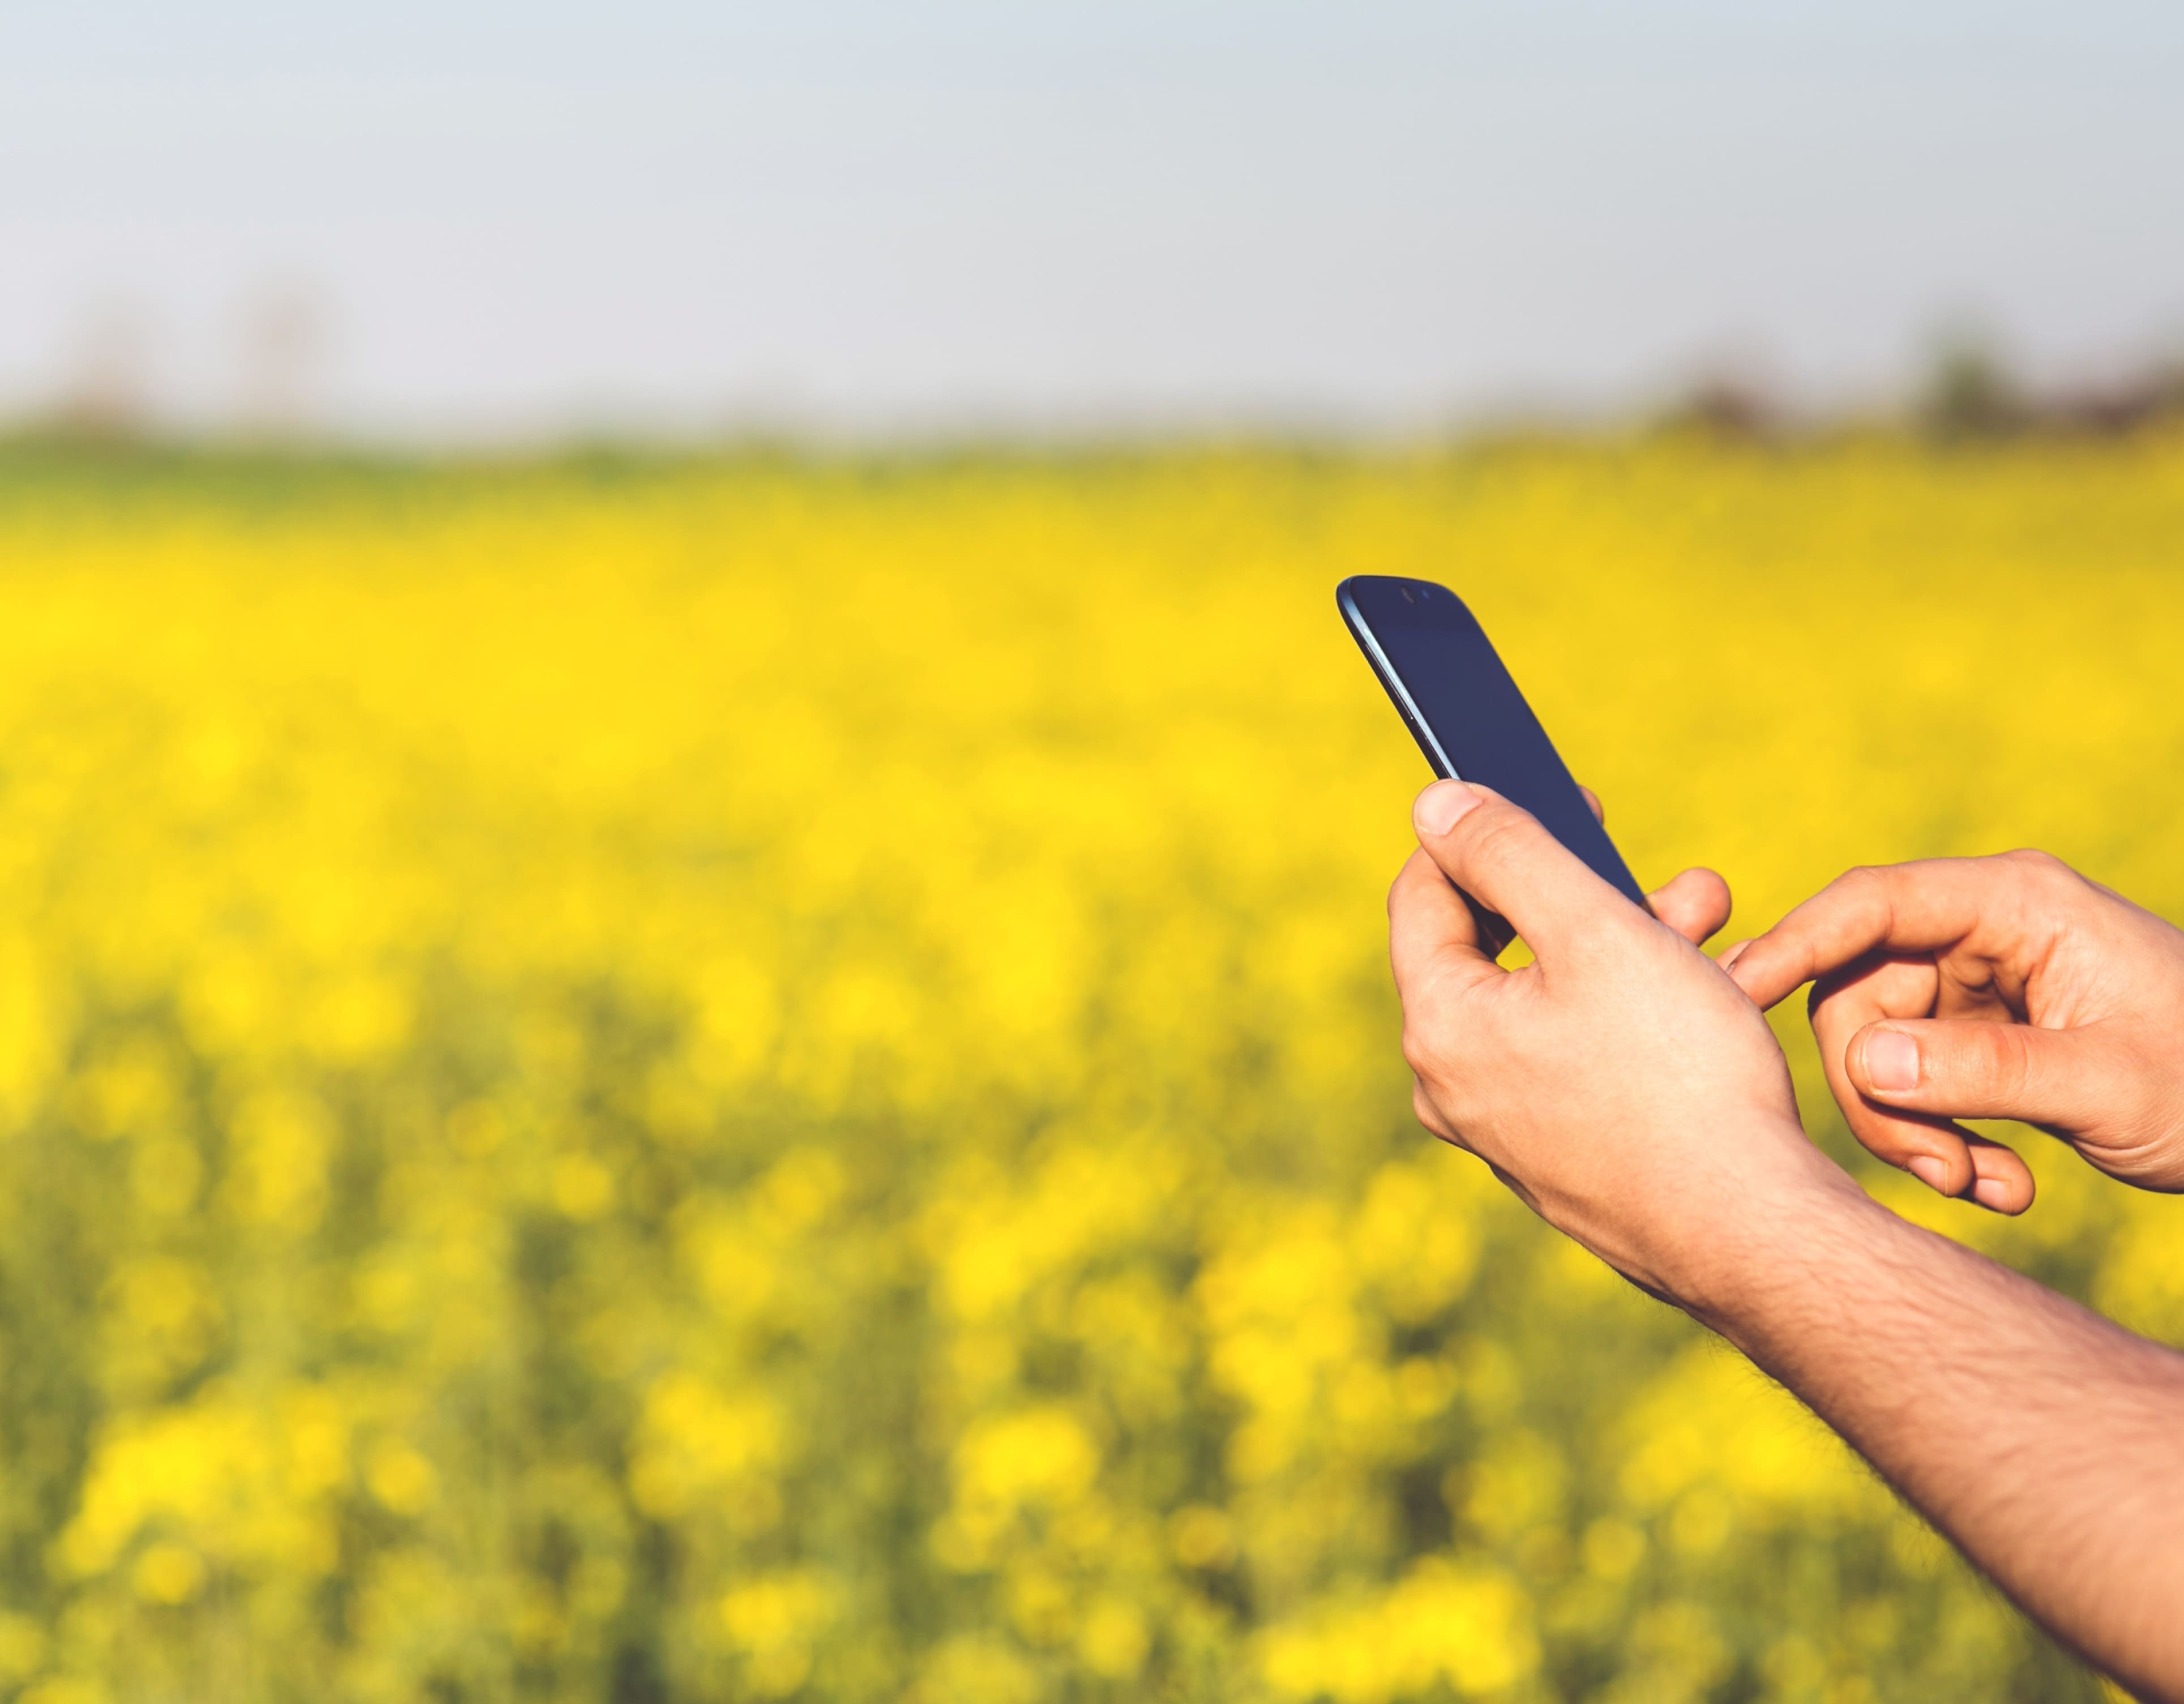 In 2025, all government services in the agricultural sector will be accessible from a smartphone